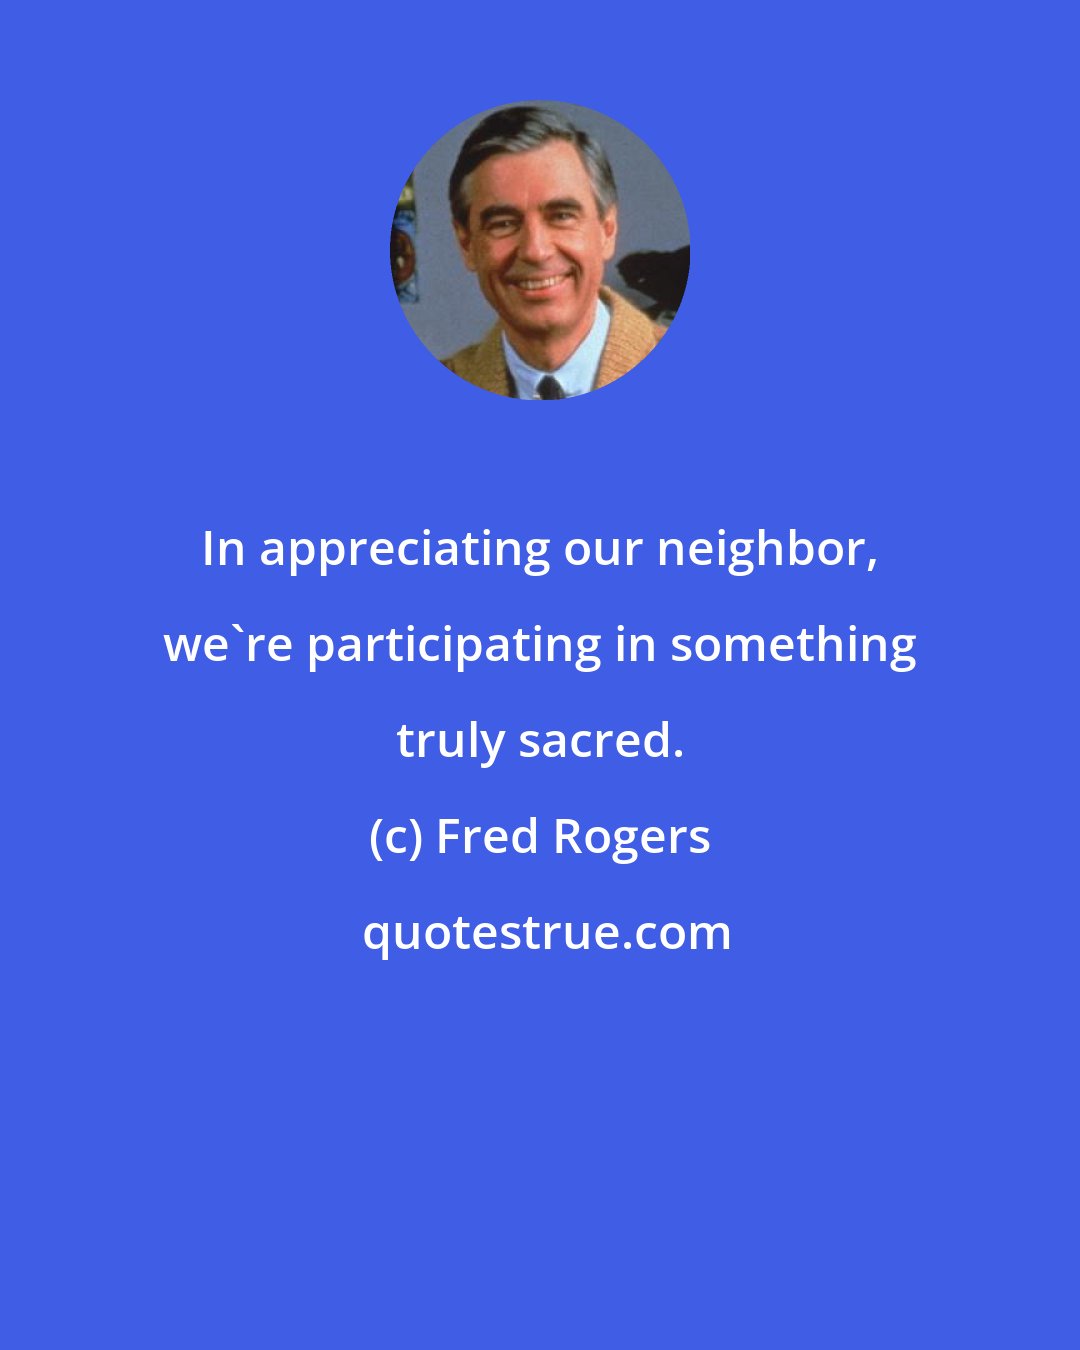 Fred Rogers: In appreciating our neighbor, we're participating in something truly sacred.